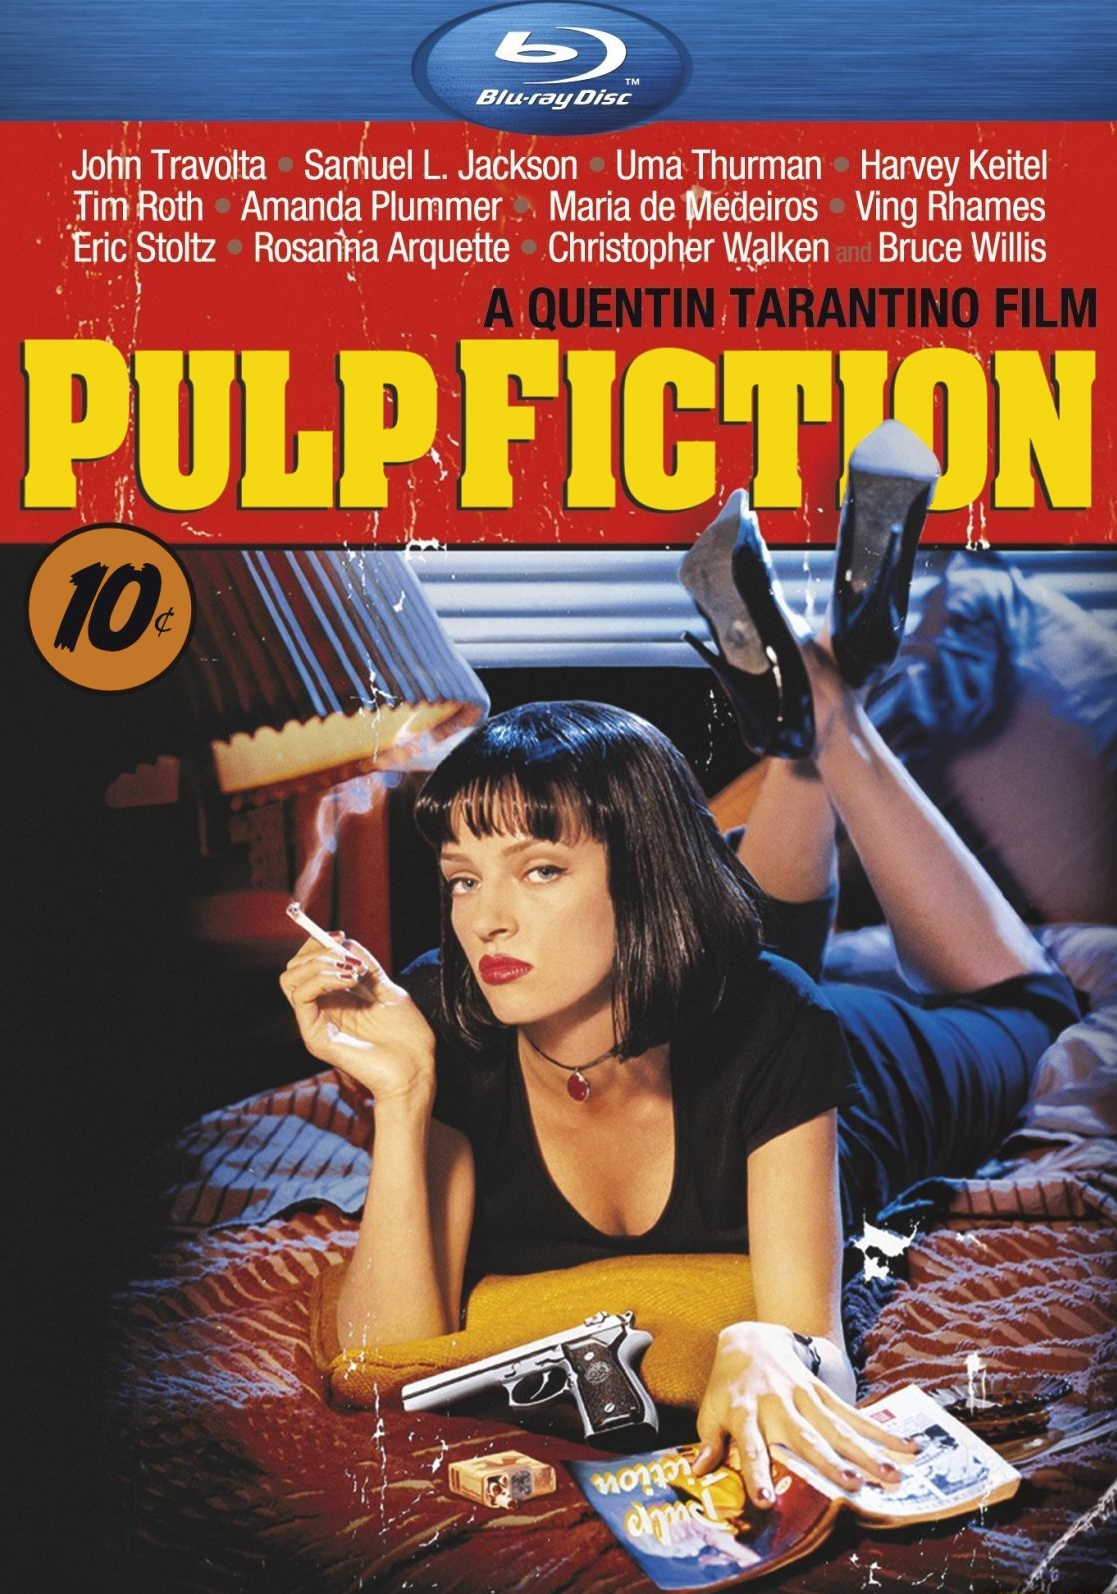  Poster  Pulp  Fiction  1994 Poster  1 din 85 CineMagia ro